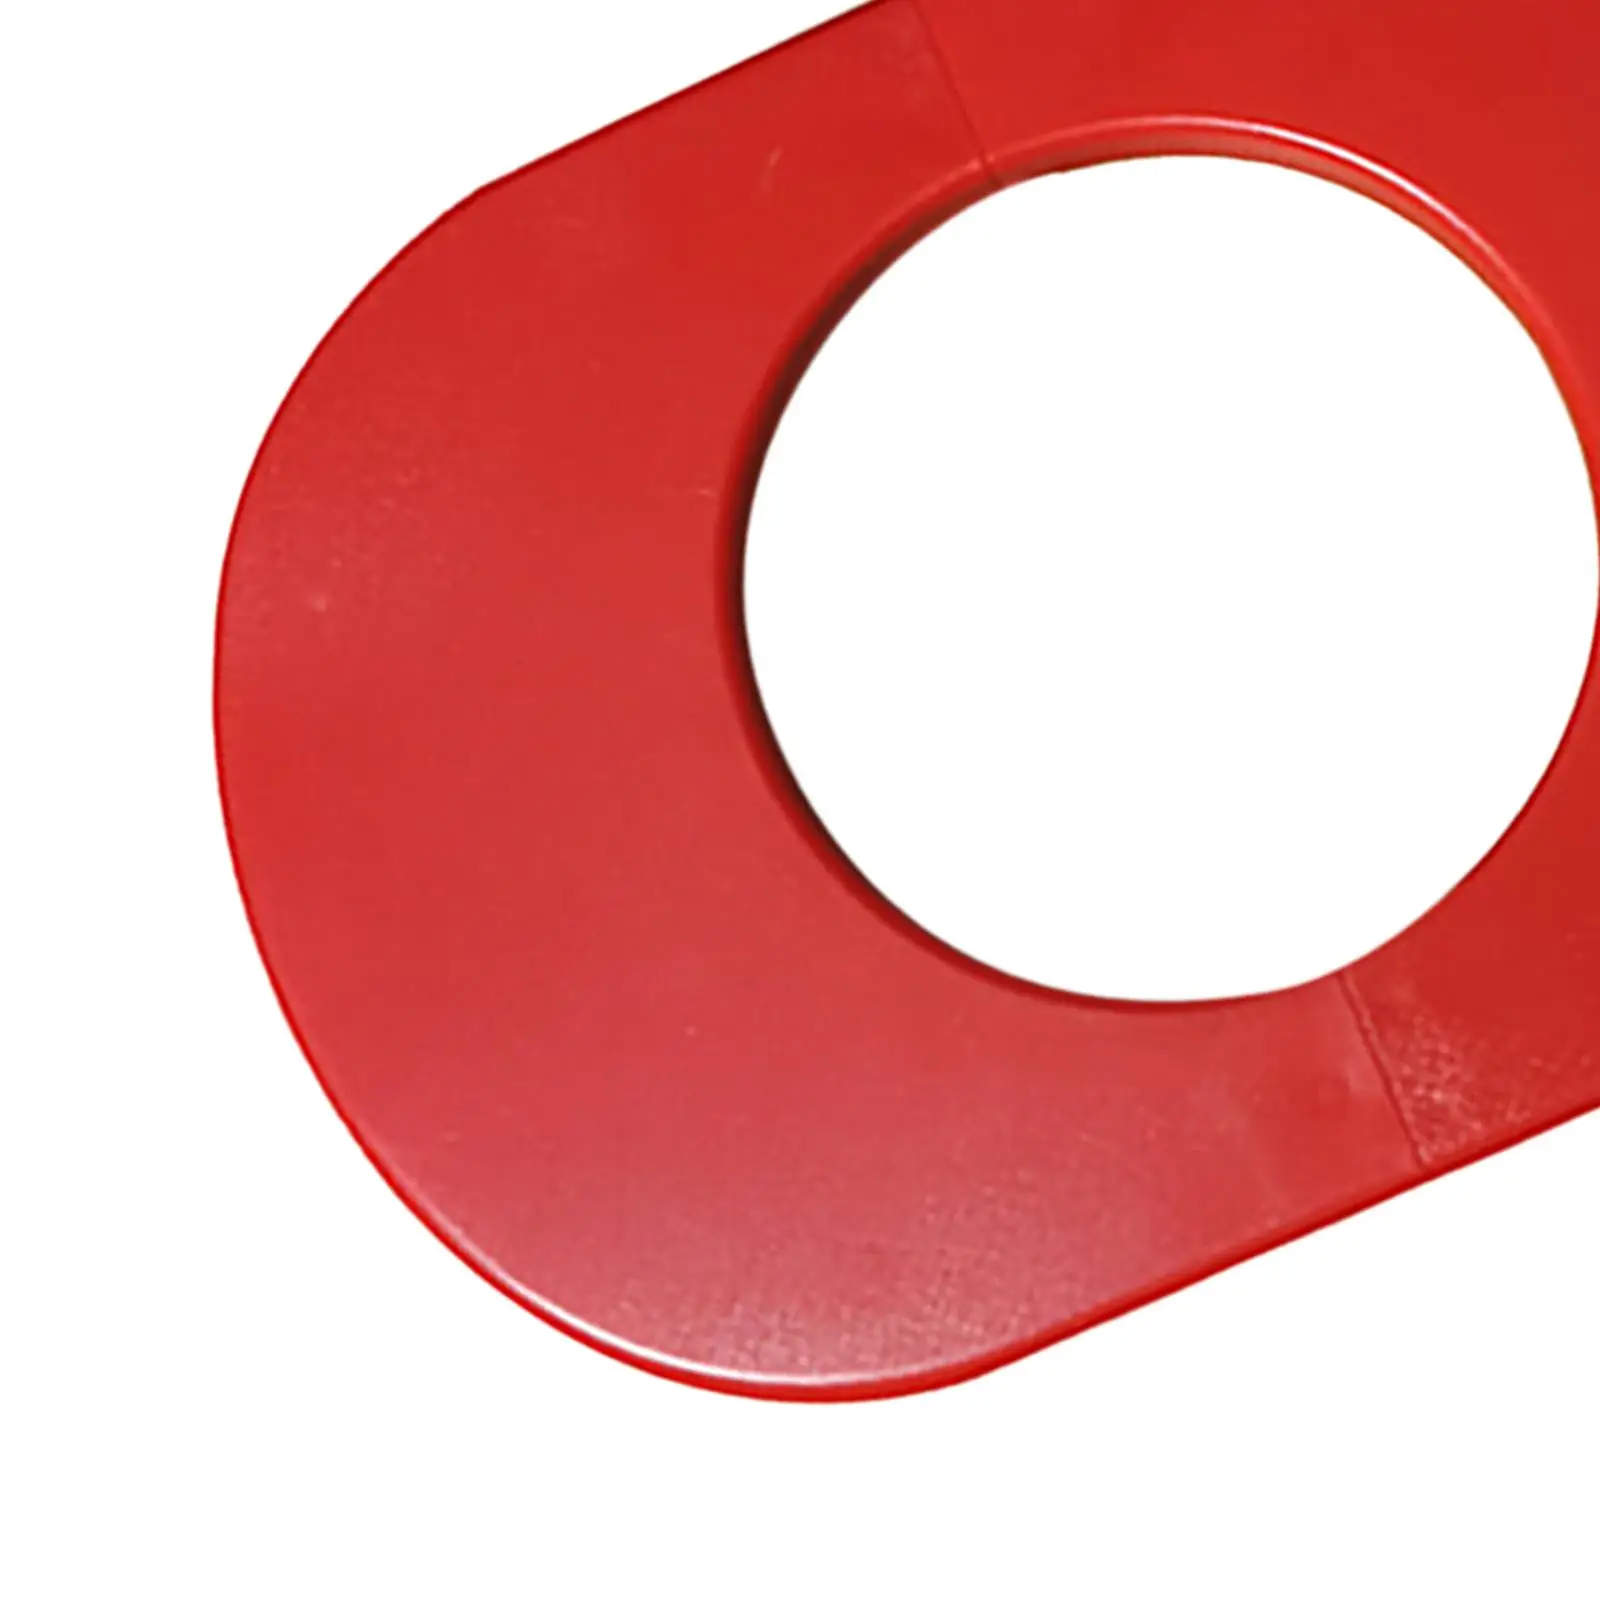 Fire Department Connection Cap Portable Fire Sprinkler Cover Decoration Cover for Construction Fire Pipes Maintenance